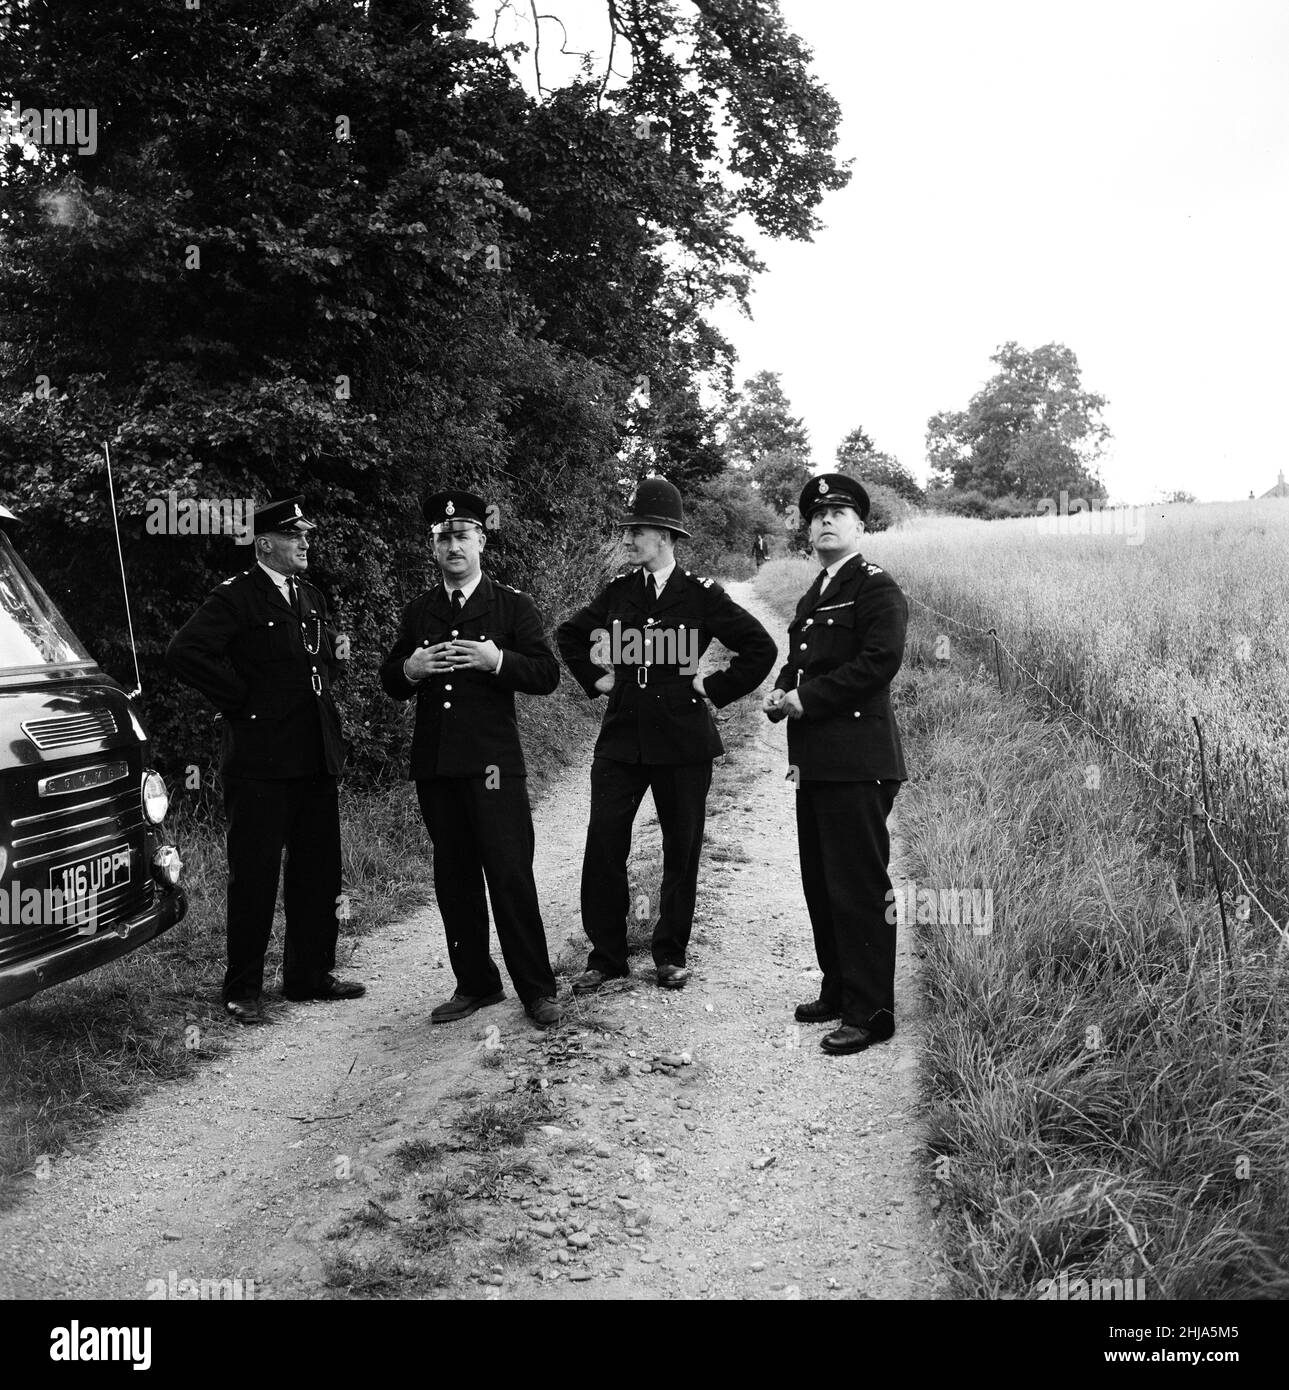 Leatherslade Farm, between Oakley and Brill in Buckinghamshire, hideout used by gang, 27 miles from the crime scene, Tuesday 13th August 1963. Our Picture Shows ... Police Officers guard access to country lane leading up to remote farmhouse used as hideaway by gang in immediate aftermath of robbery.   The 1963 Great Train Robbery was the robbery of 2.6 million pounds from a Royal Mail train heading from Glasgow to London on the West Coast Main Line in the early hours of 8th August 1963, at Bridego Railway Bridge, Ledburn, near Mentmore in  Buckinghamshire, England. Stock Photo